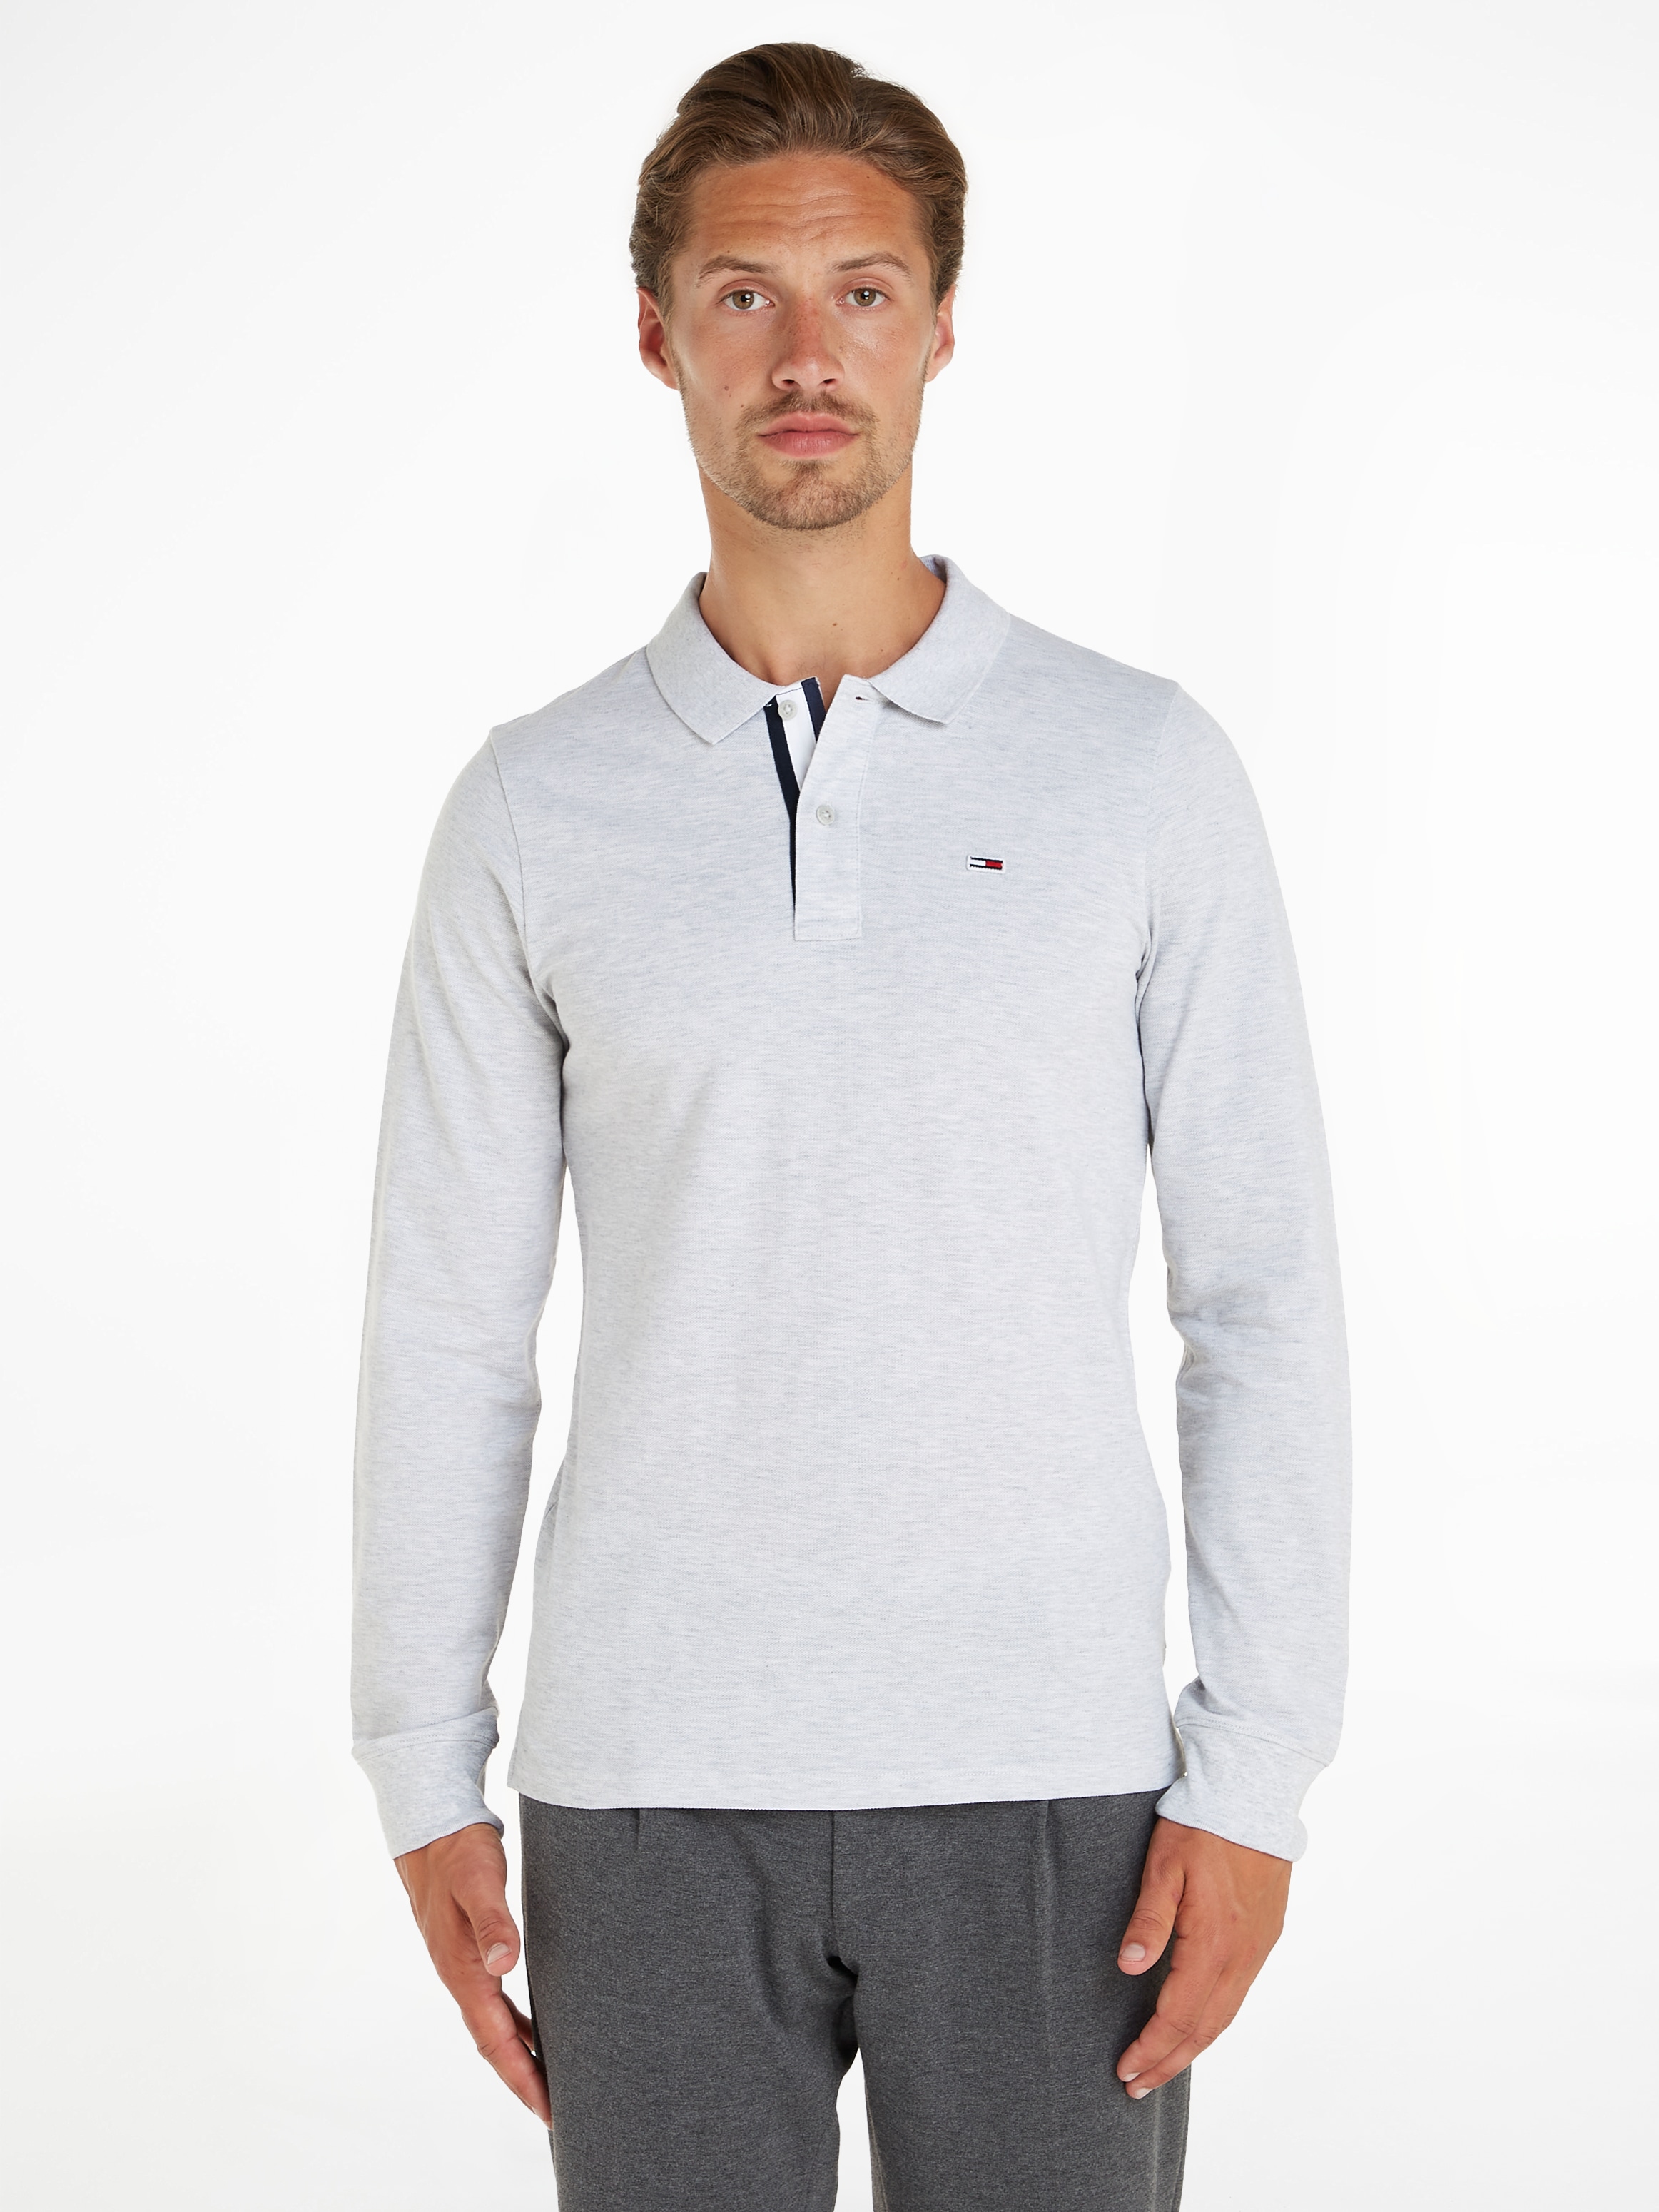 Tommy Jeans Langarm-Poloshirt »TJM SLIM online LS POLO« SOLID bei